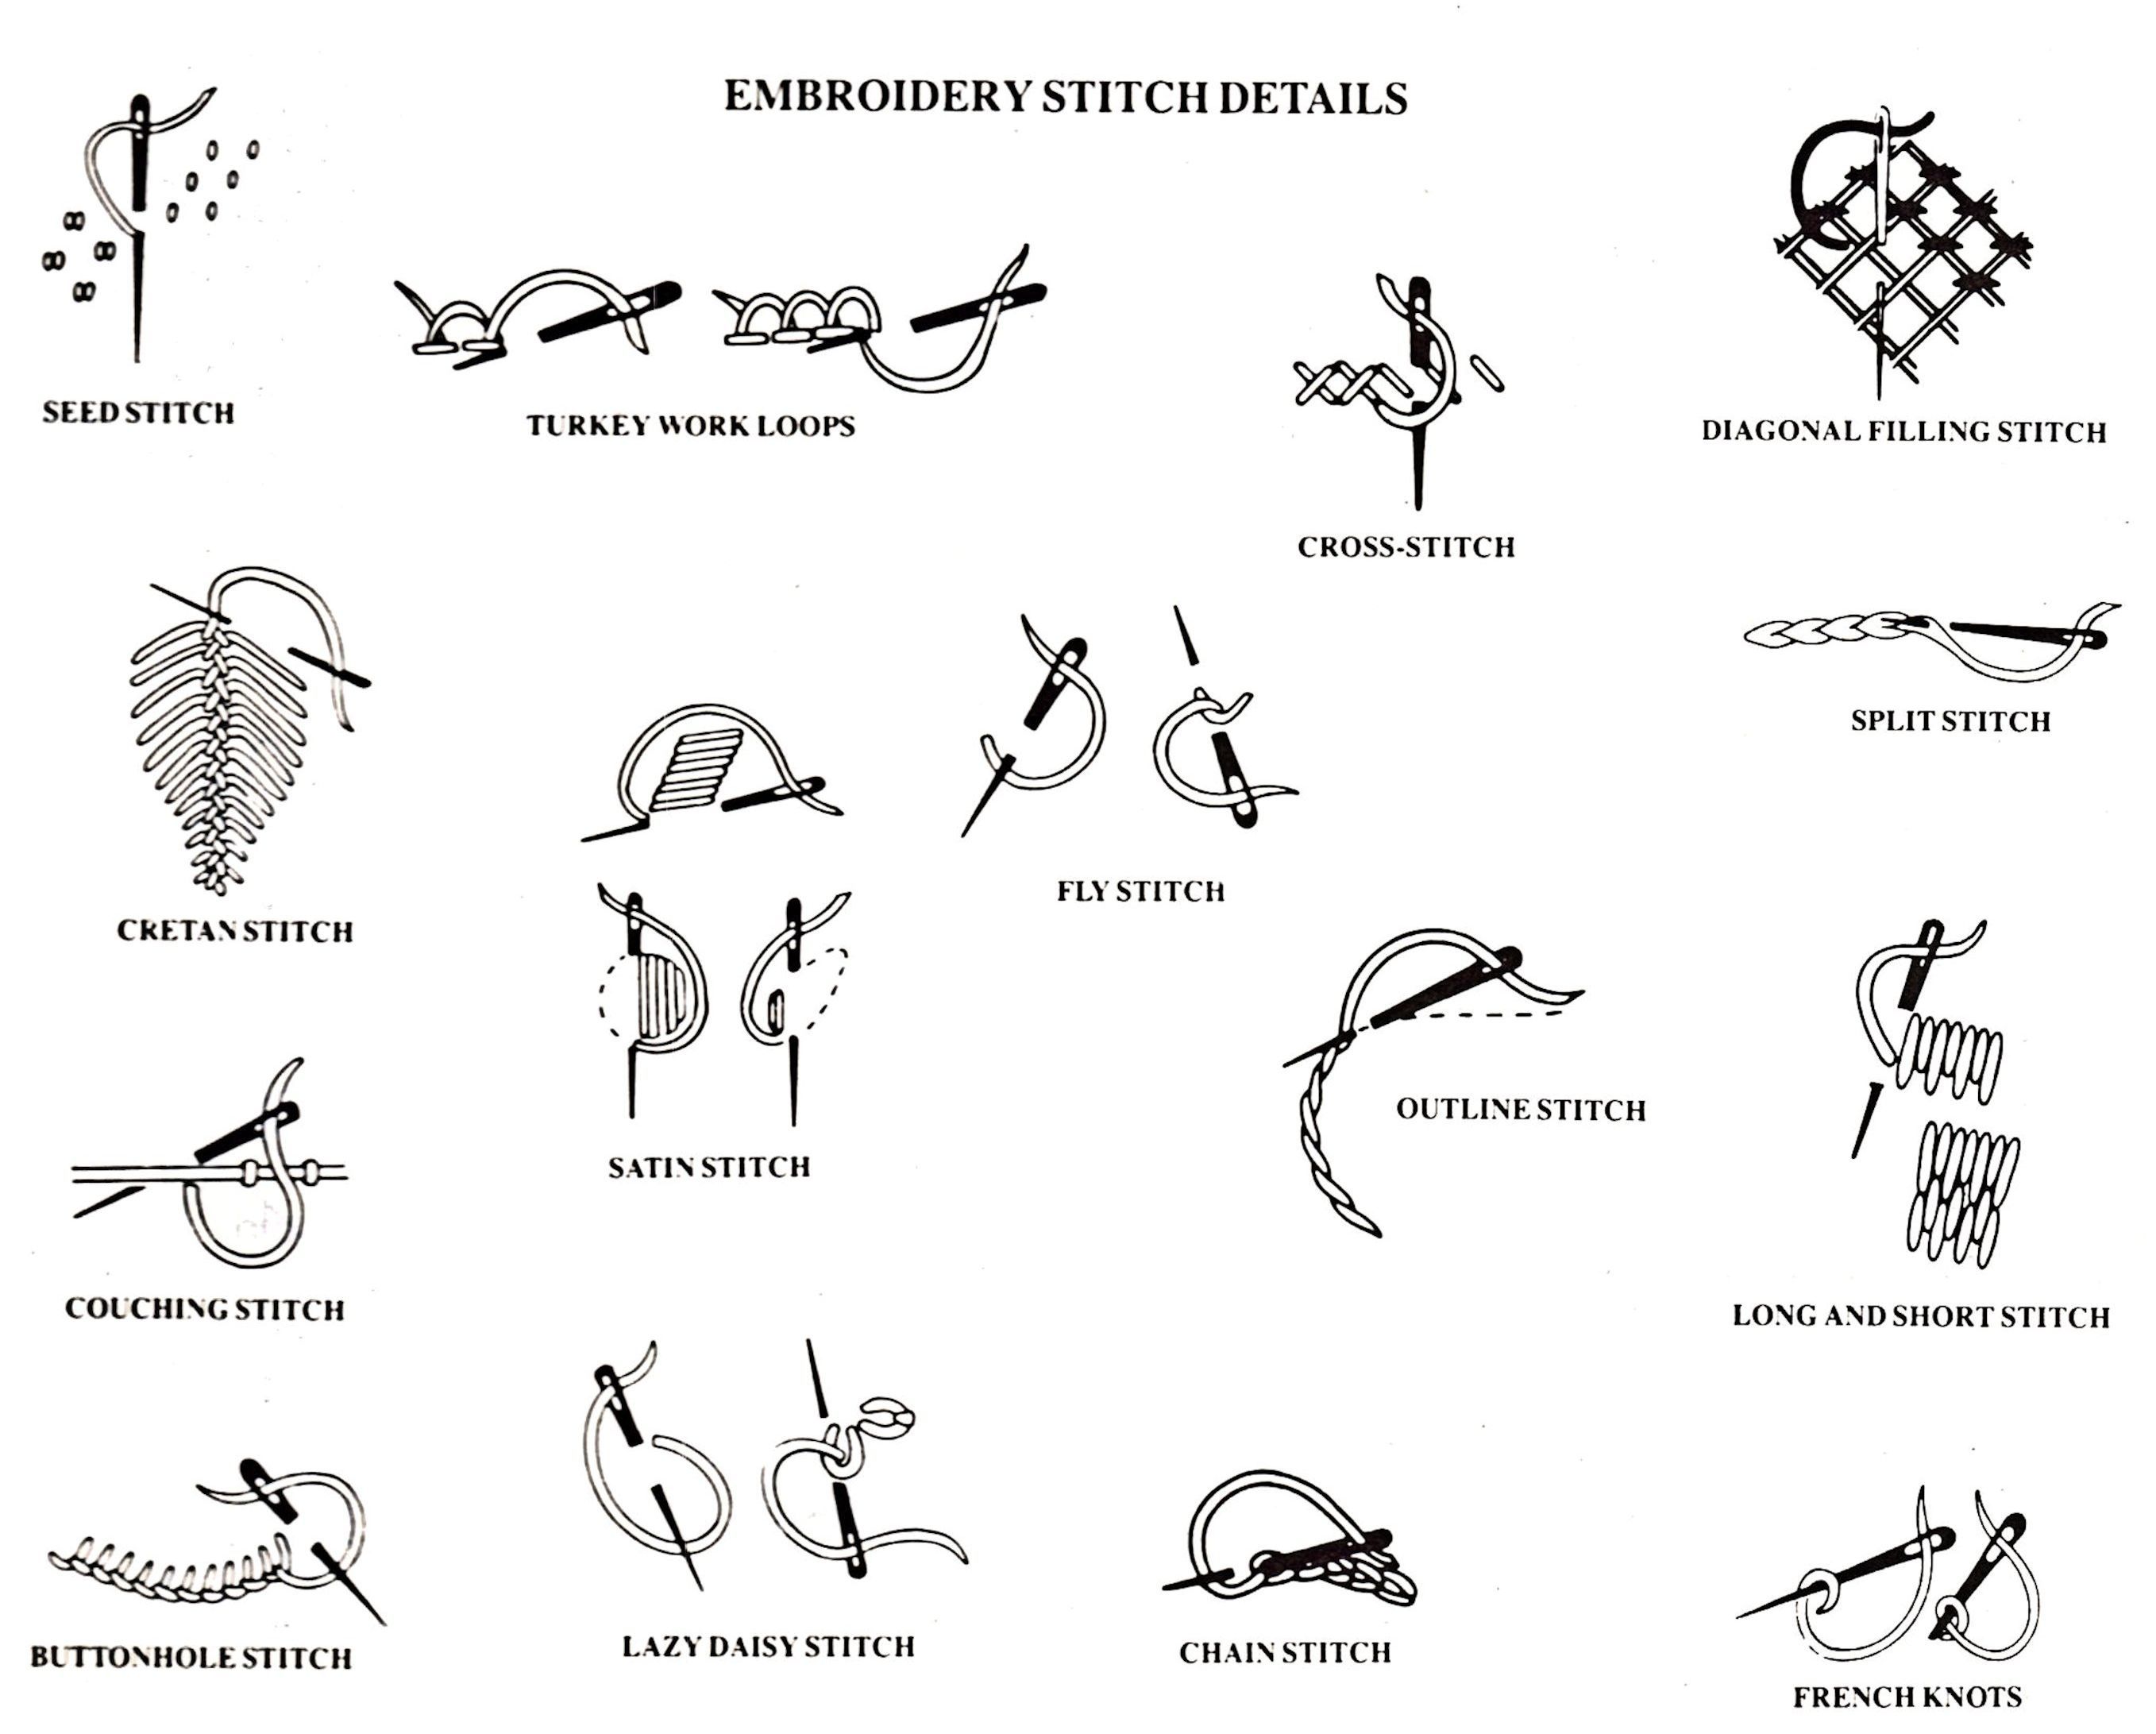 Hand Embroidery Stitches and Tips -   Wonderful pictorial reference to basic and embroidery stitches.